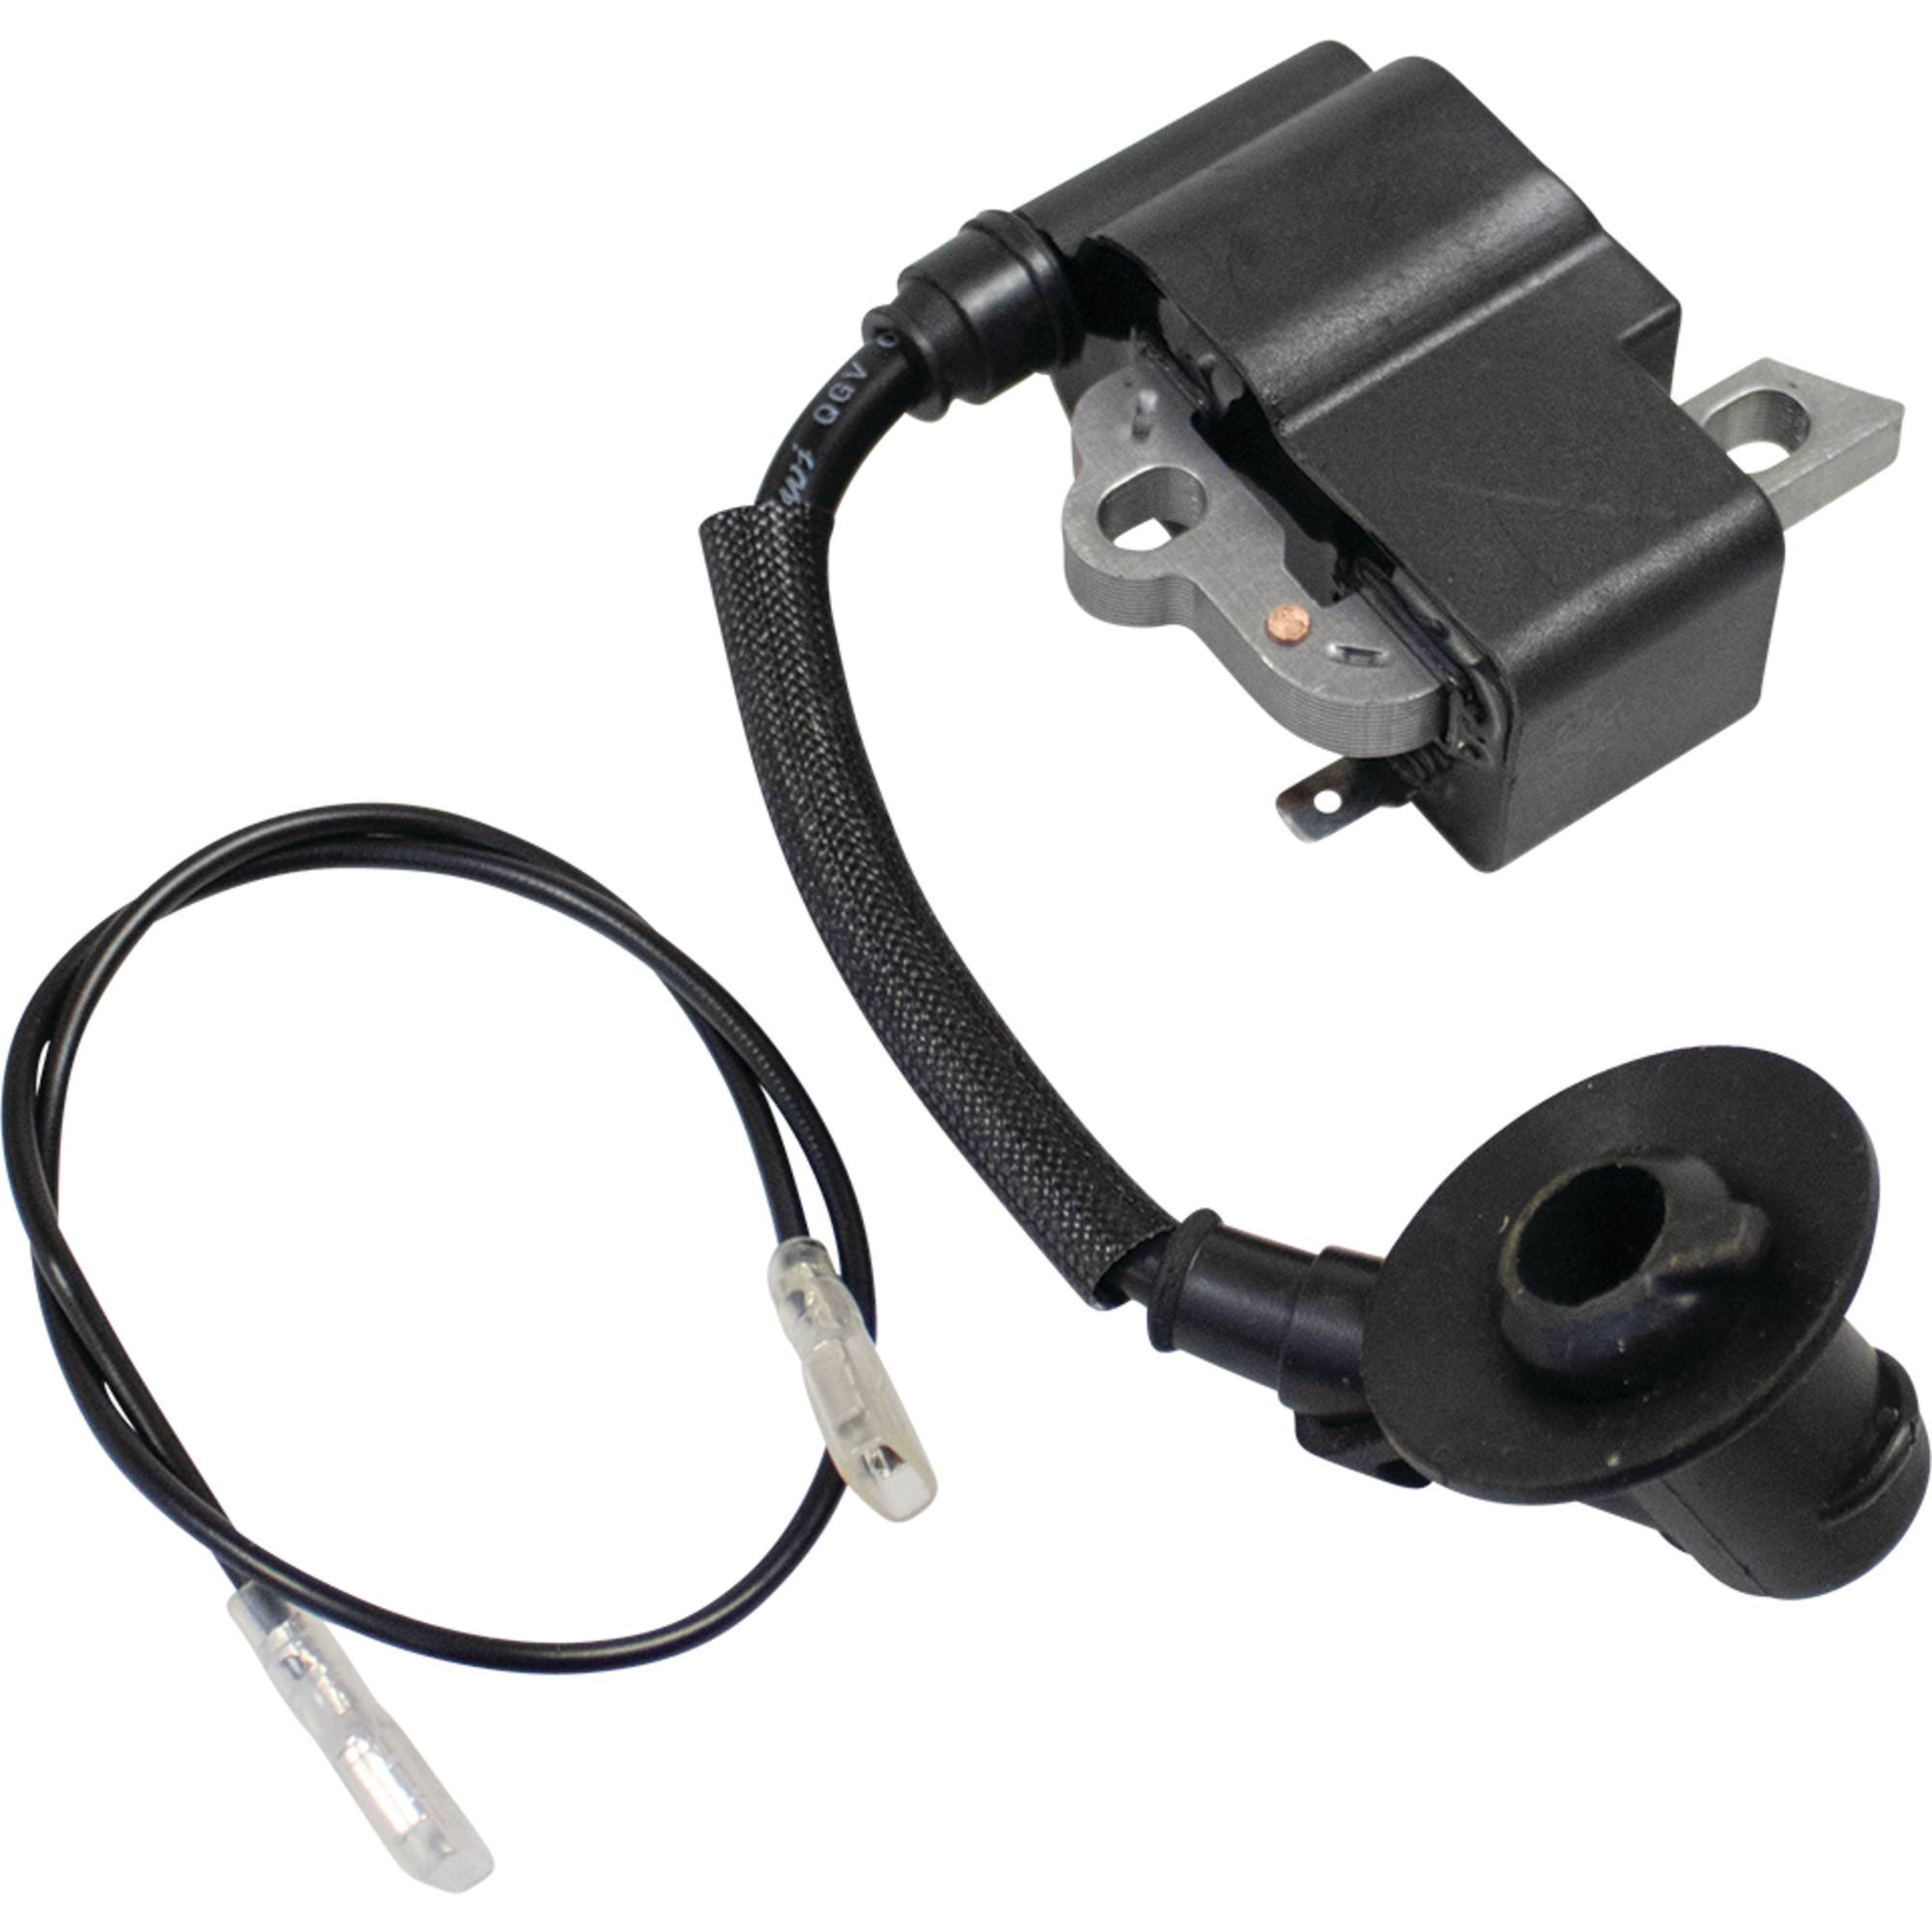 Stens 600-964 Ignition Coil for Stihl 1139 400 1307